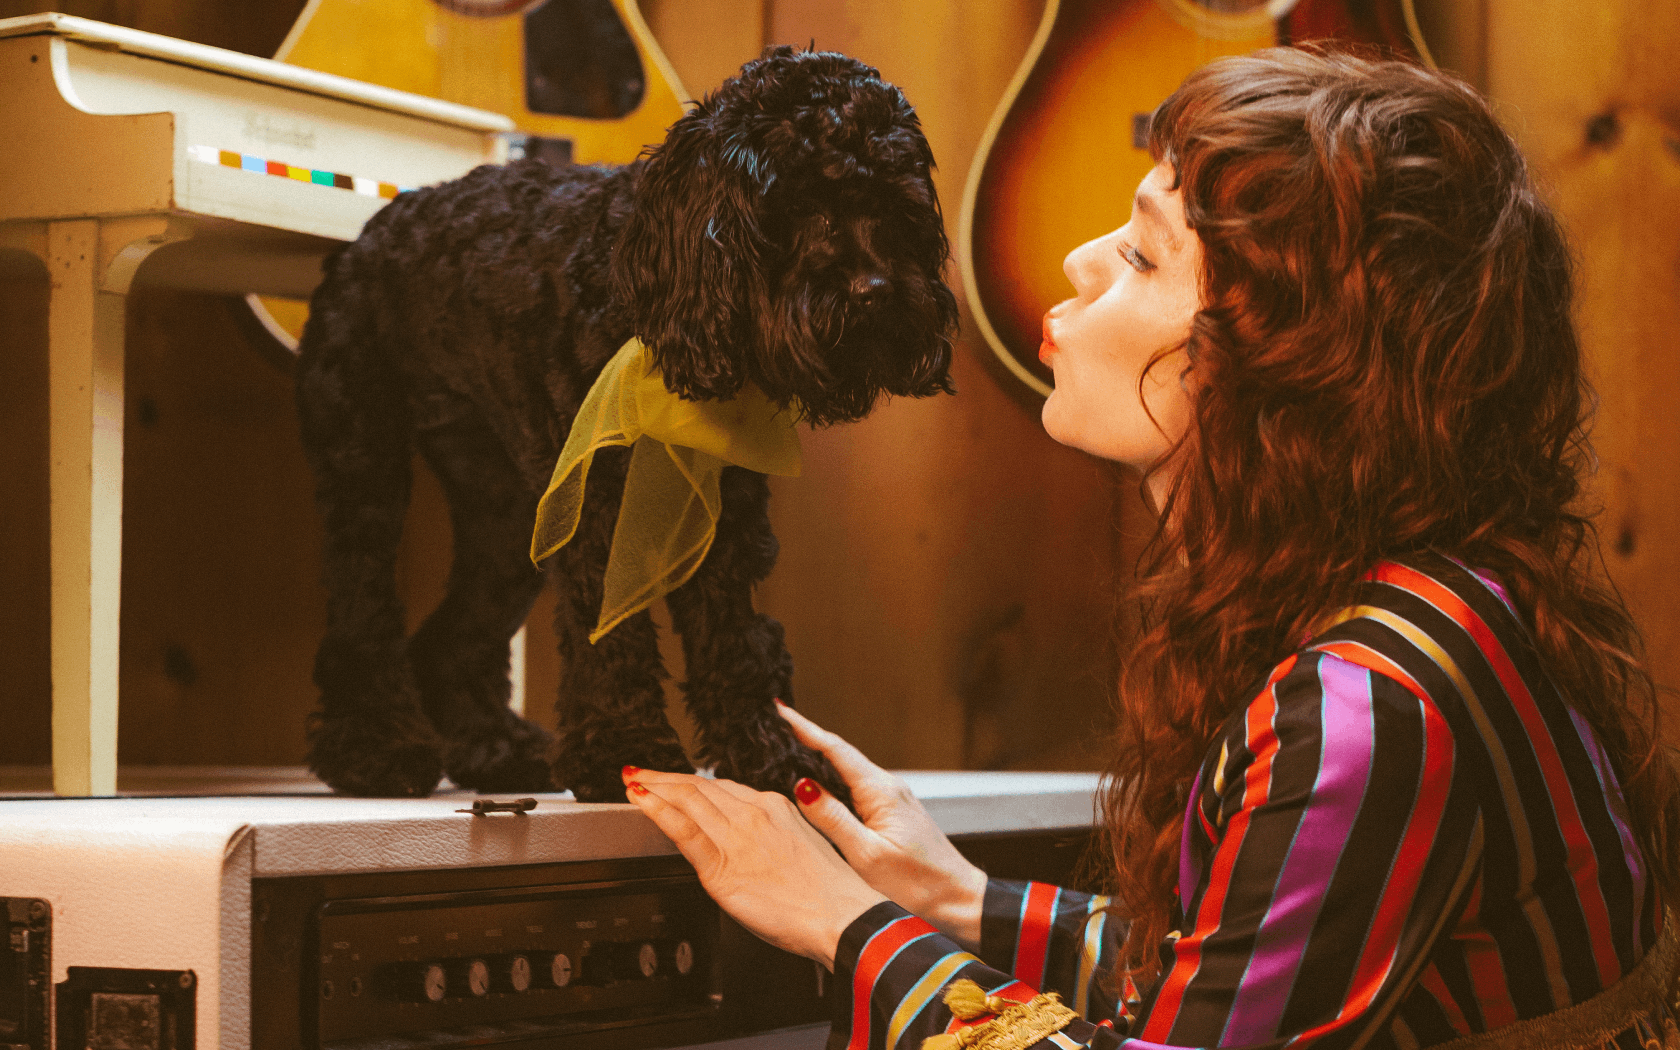 Jenny Lewis wearing a jacket and making a kissing gesture at a black puppy